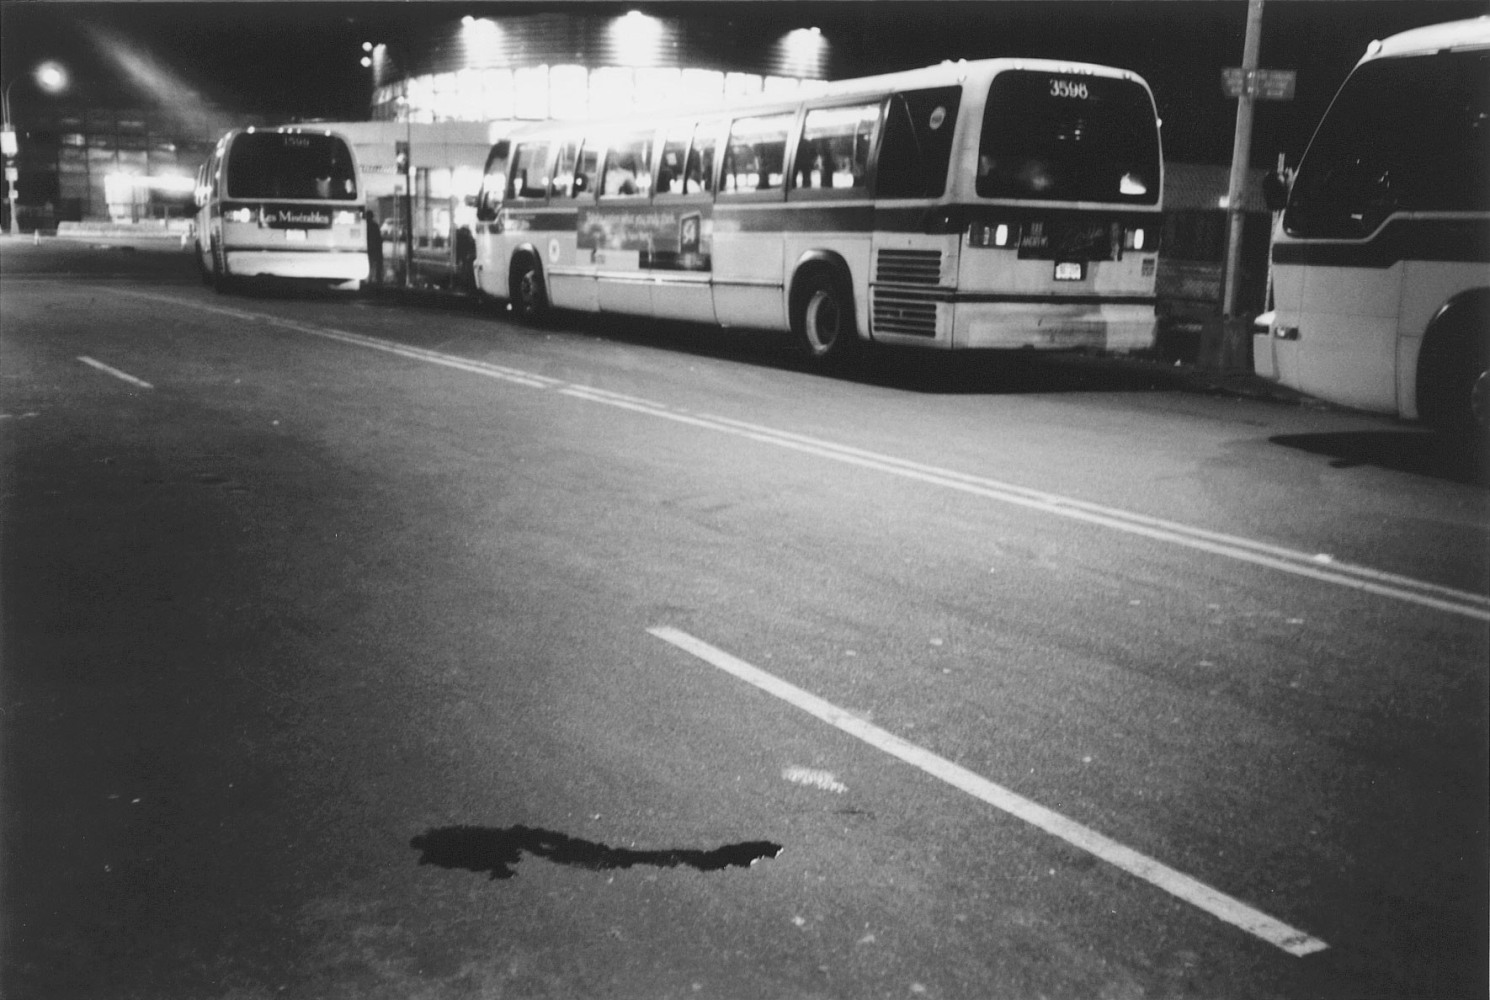 Christopher Wool
East Broadway Breakdown, 1994/2002
Portfolio of 160 inkjet prints
Edition of 3
11 x 8 1/2 inches (27.9 x 21.6 cm), variable orientation